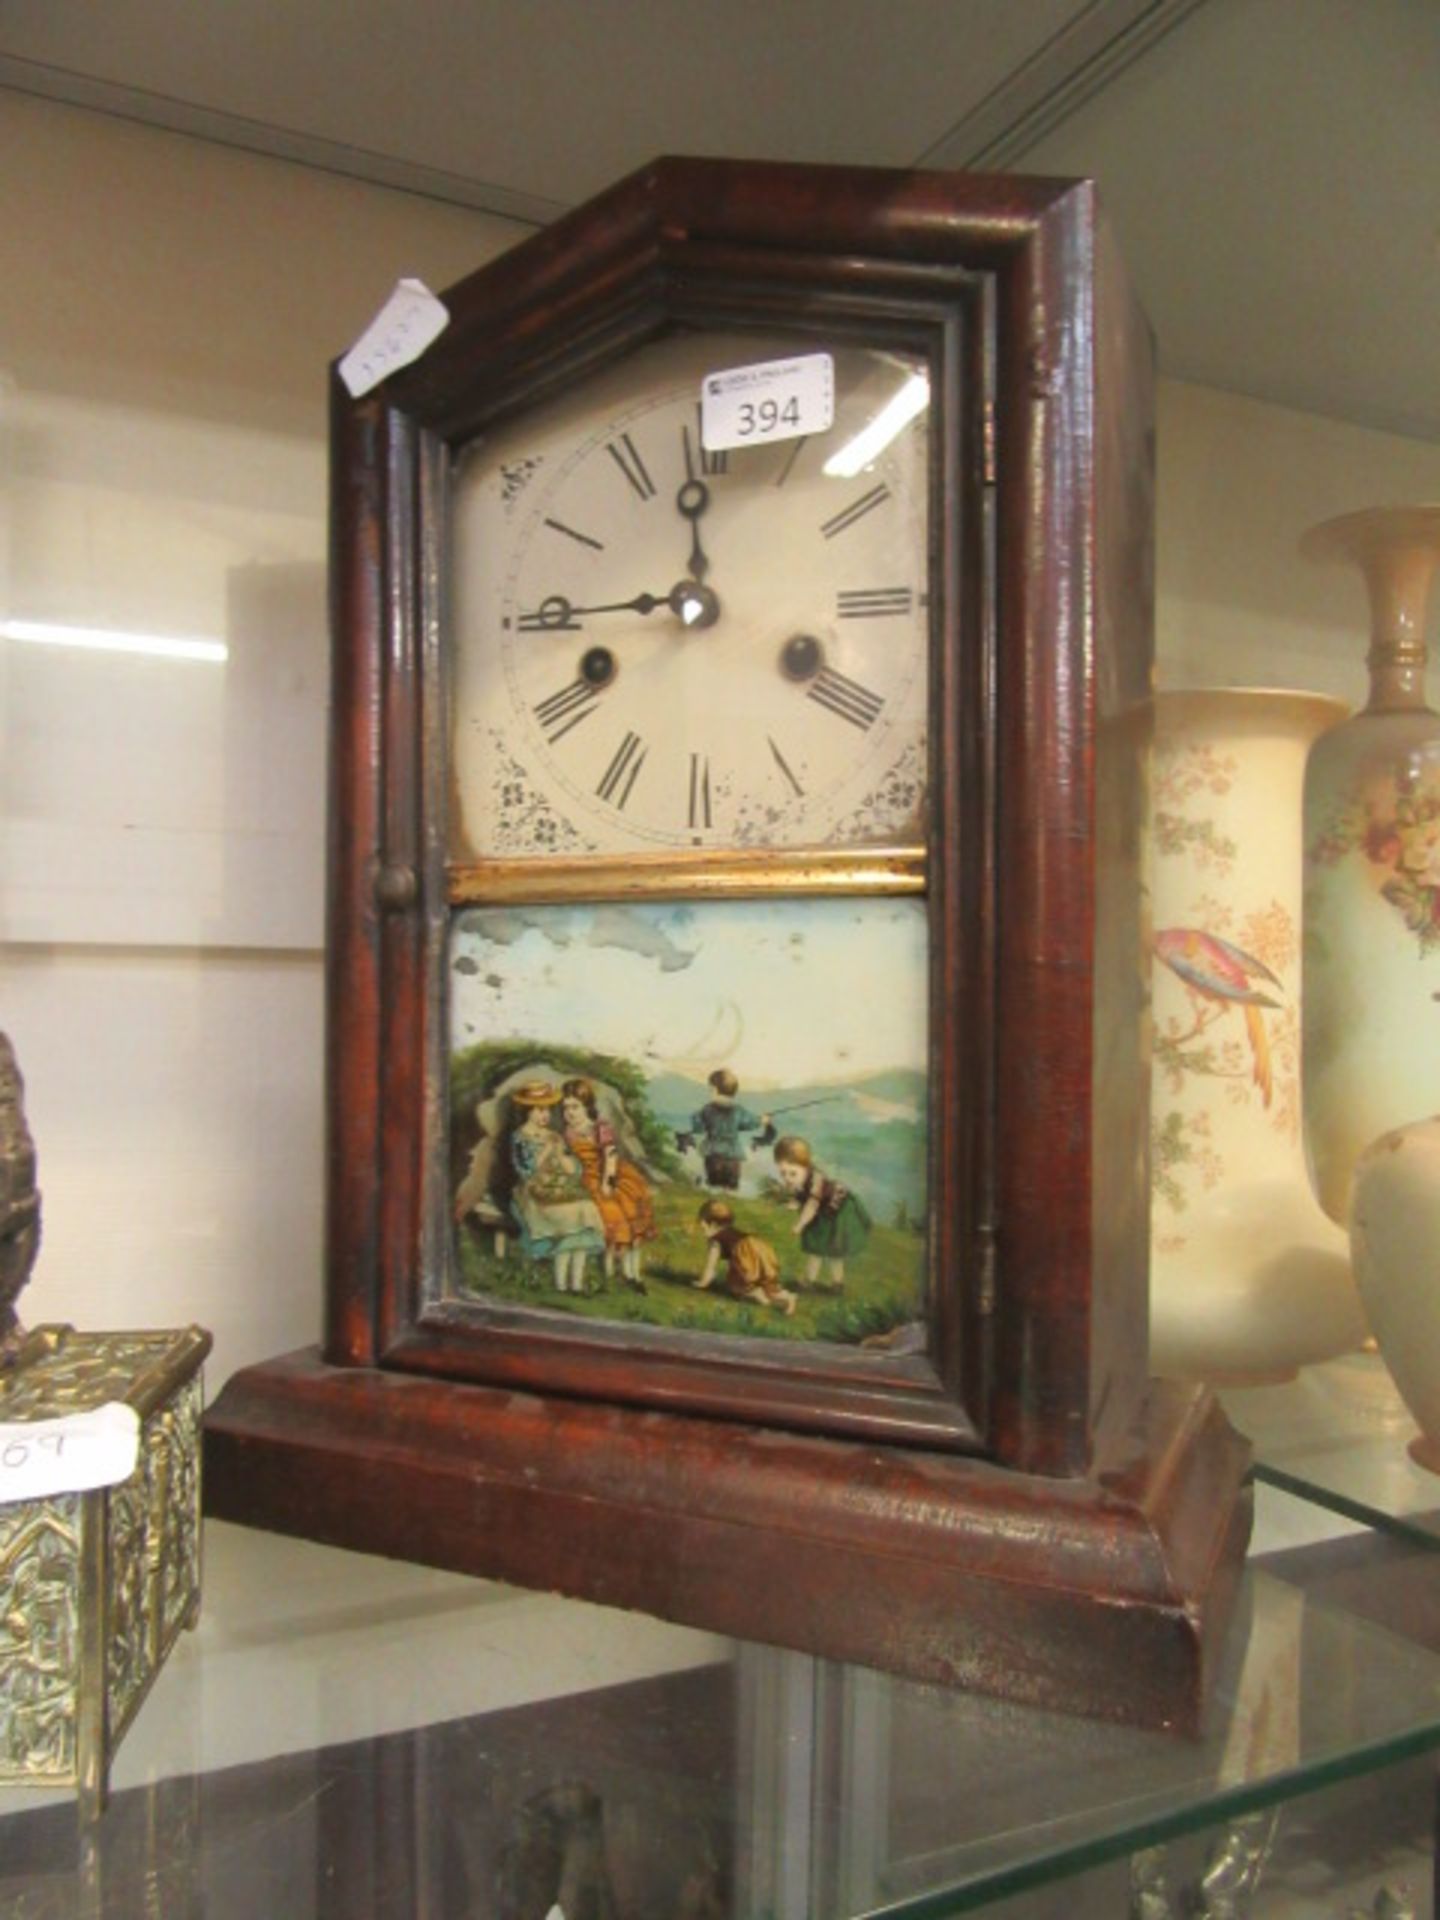 An American style mantle clock